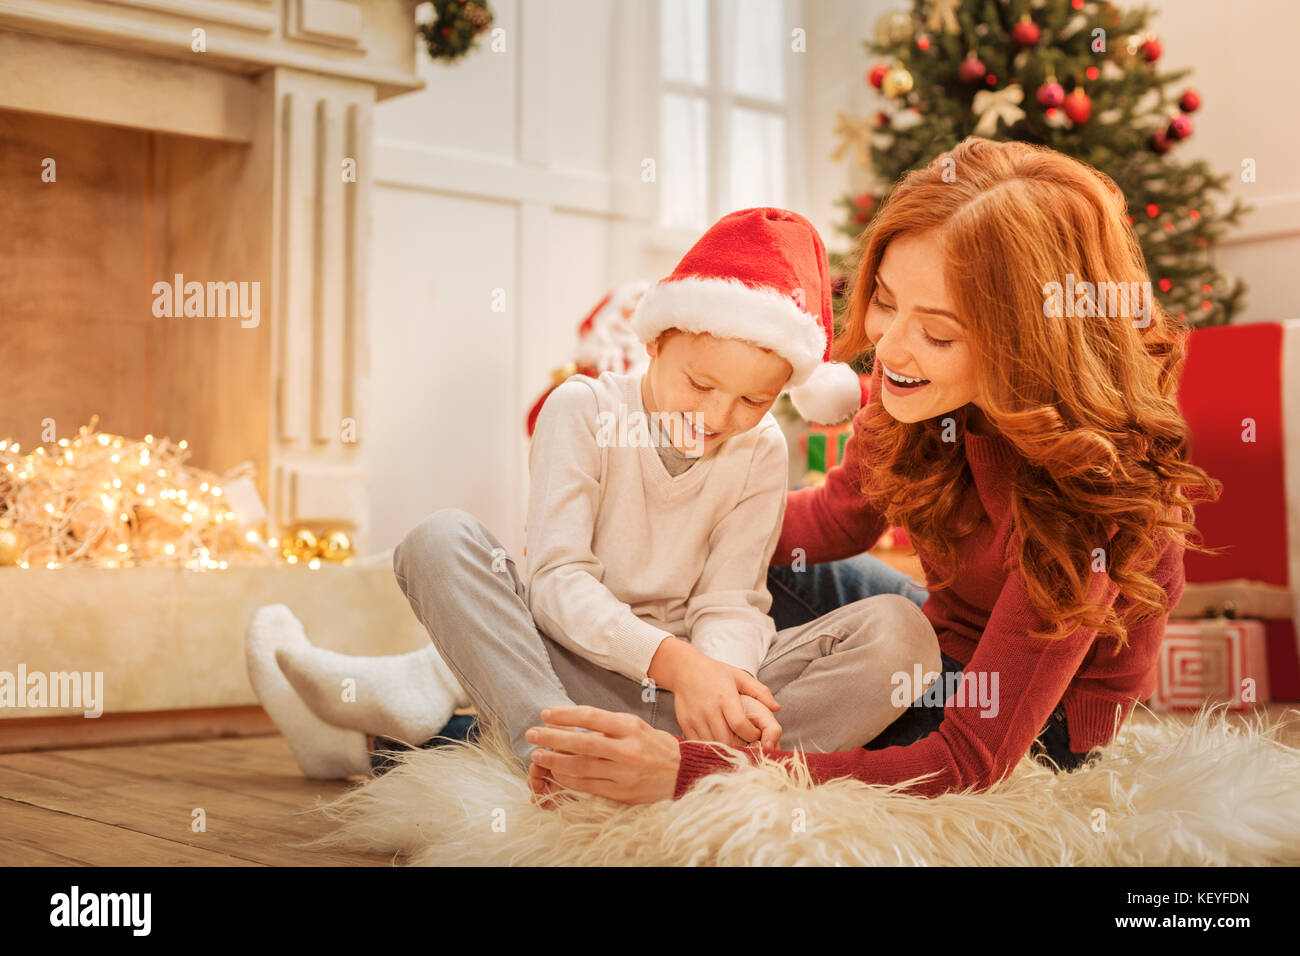 Radiant mother and son having pleasant conversation Stock Photo